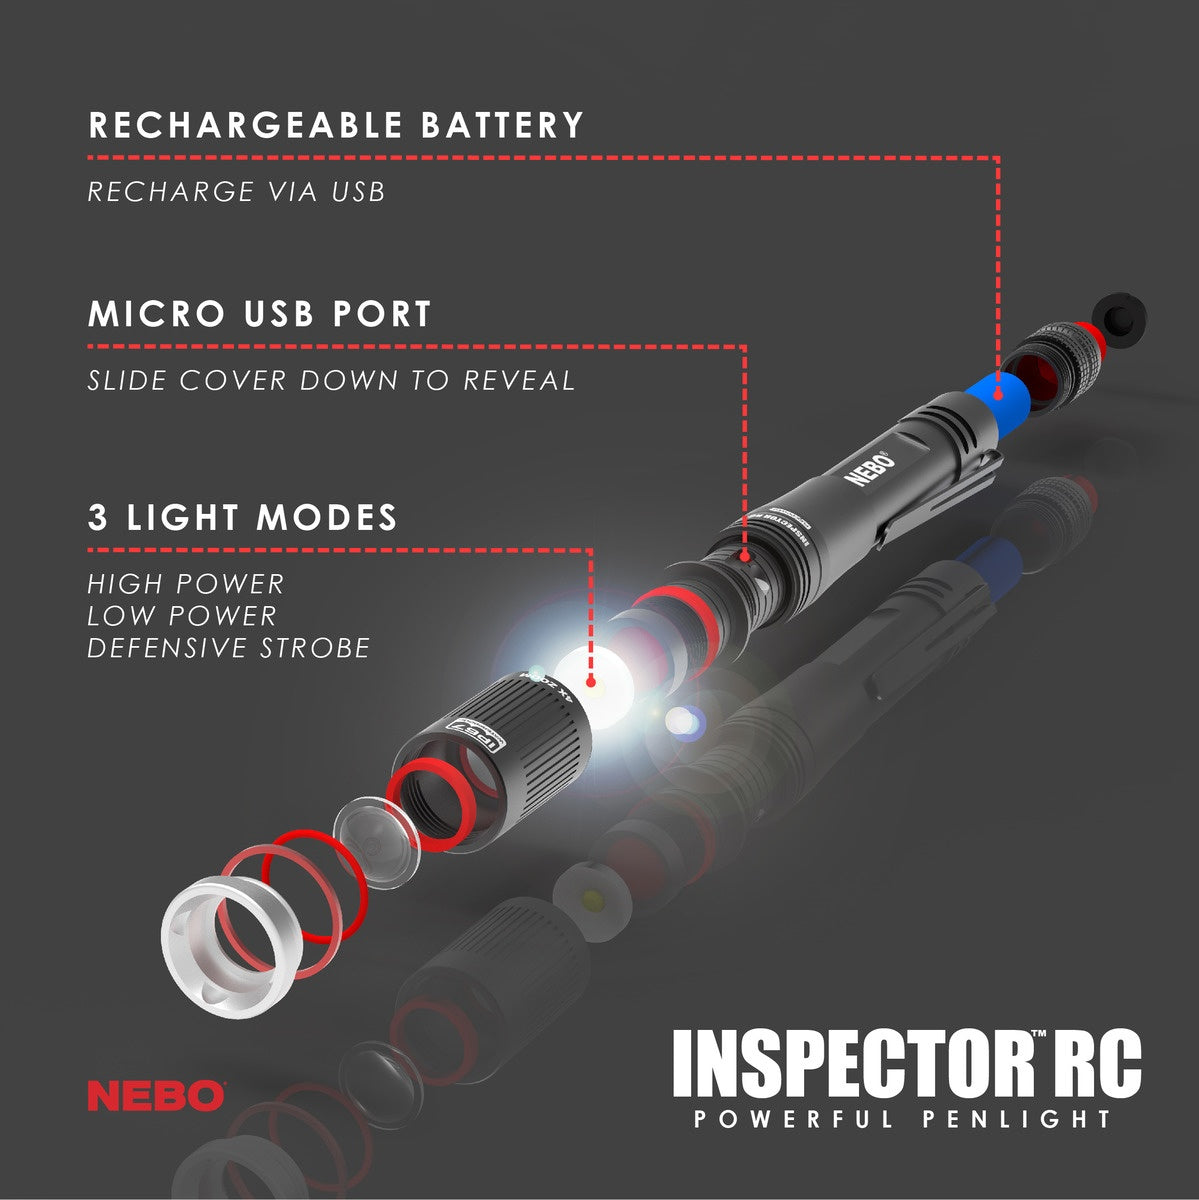 nebo inspector rc rechargeable high lumen pen light for sale near houston texas at hawkes outdoors 2102512882